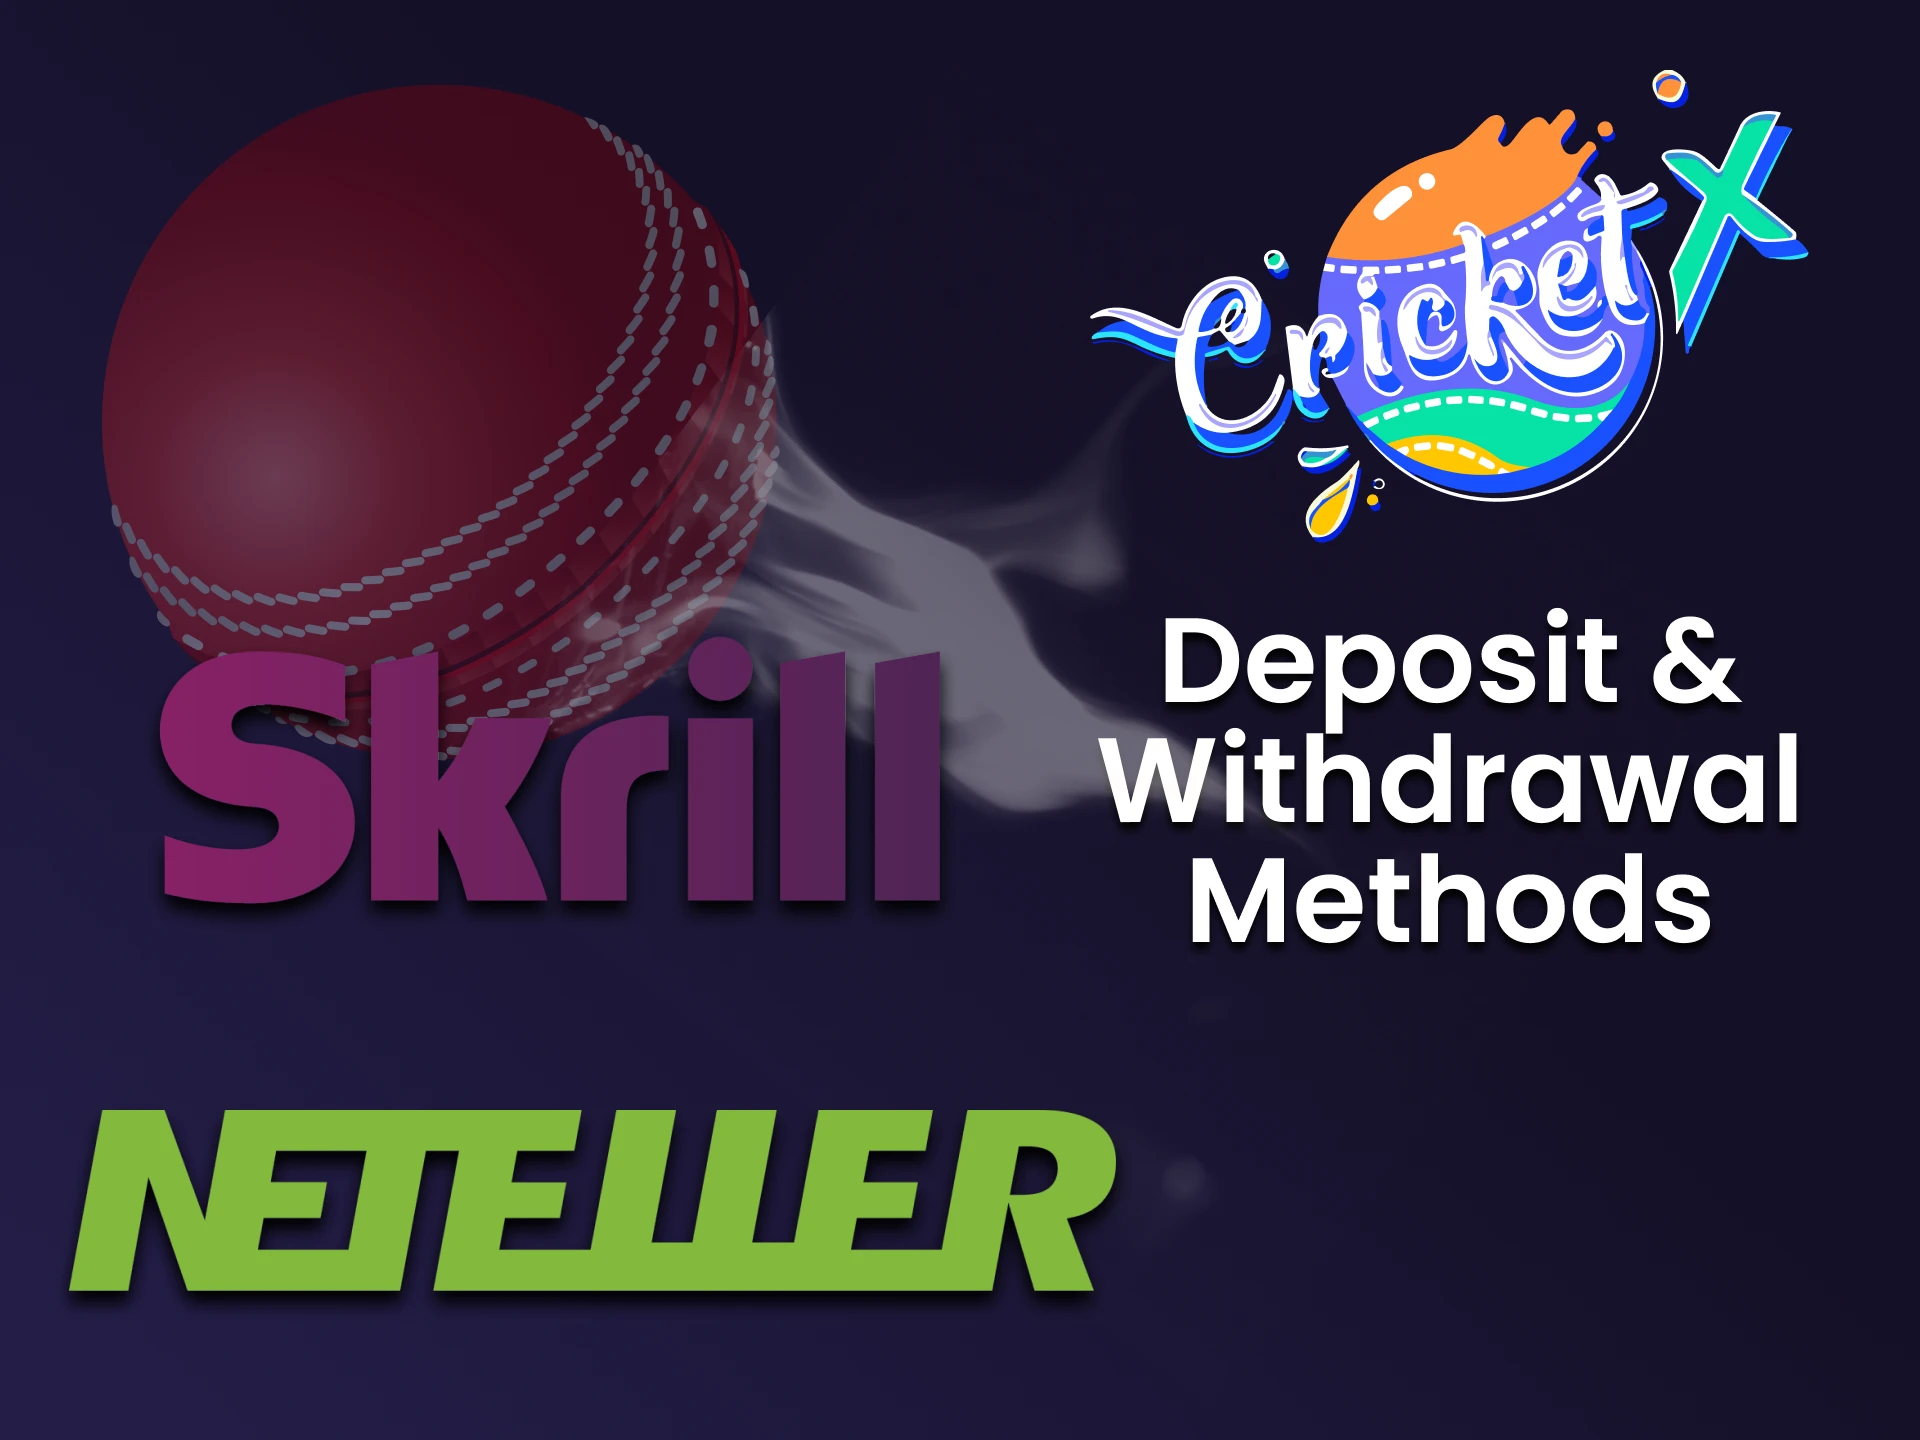 We will tell you about methods for withdrawing and replenishing funds for the game Cricket X.